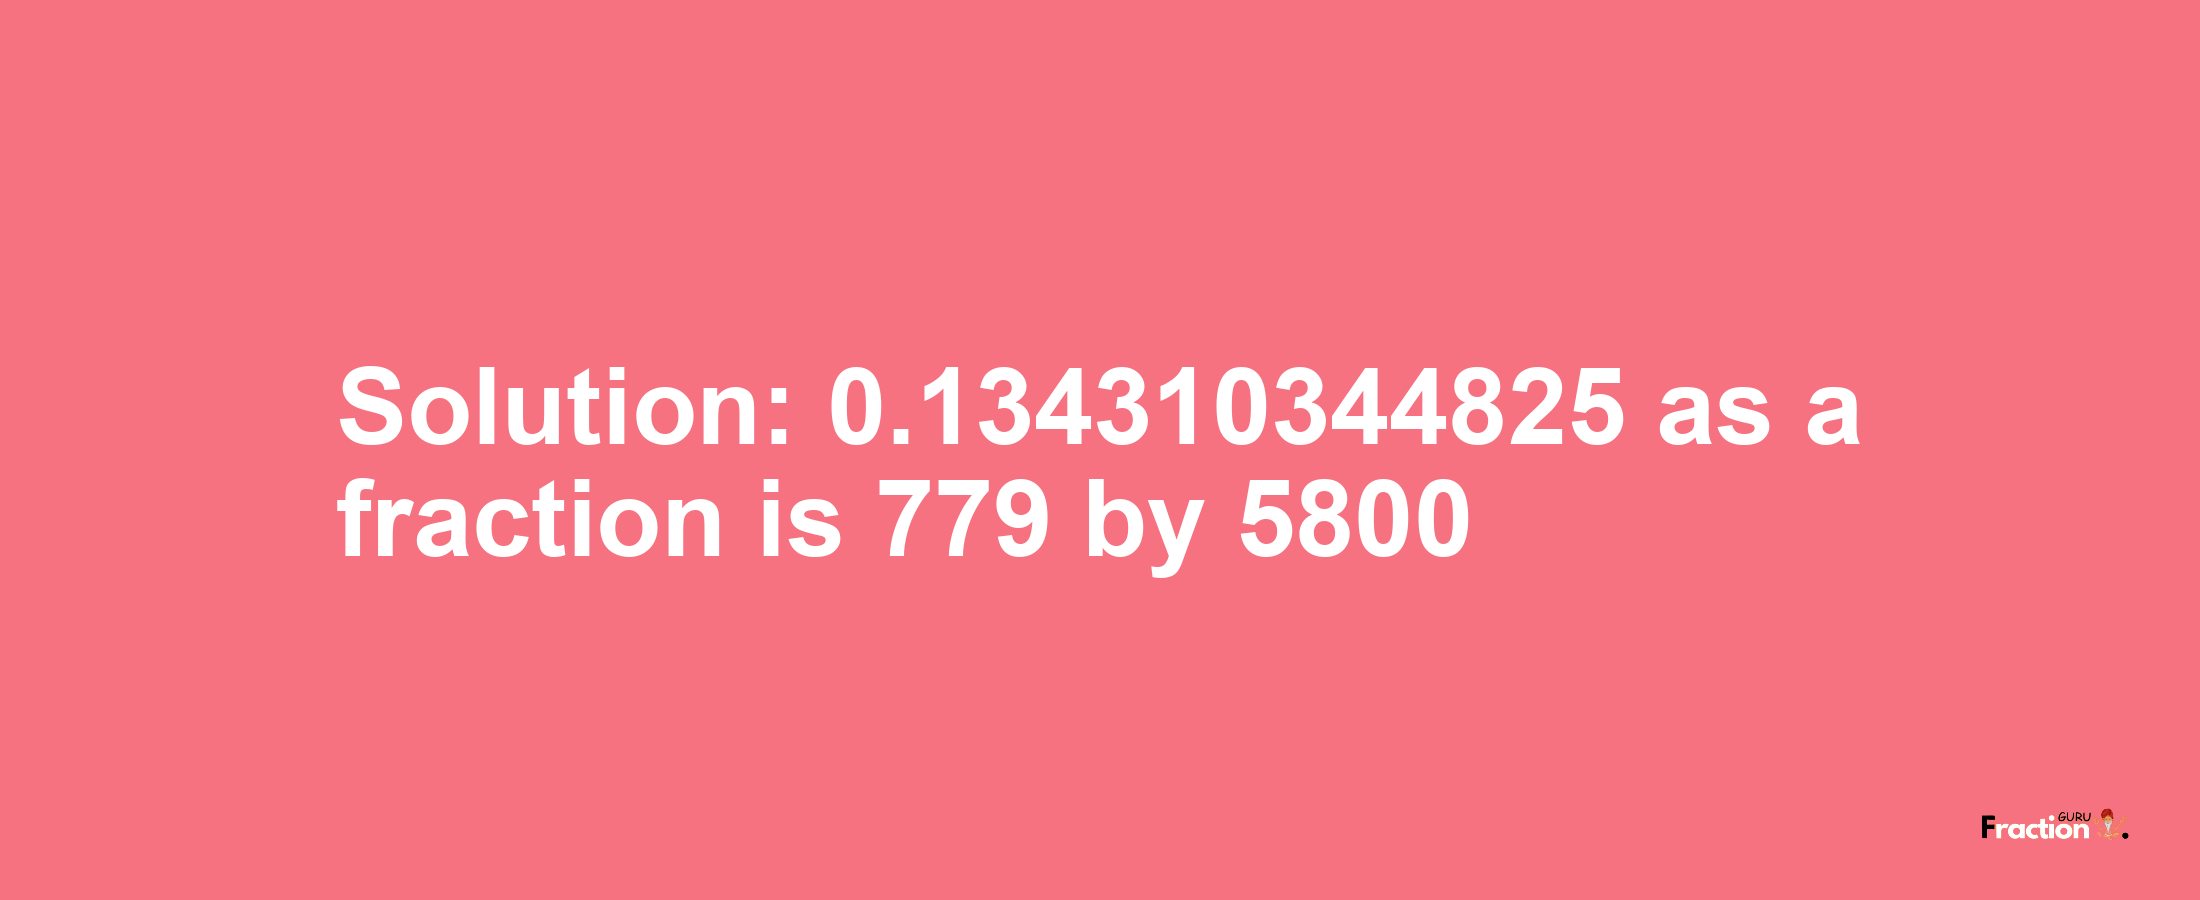 Solution:0.134310344825 as a fraction is 779/5800